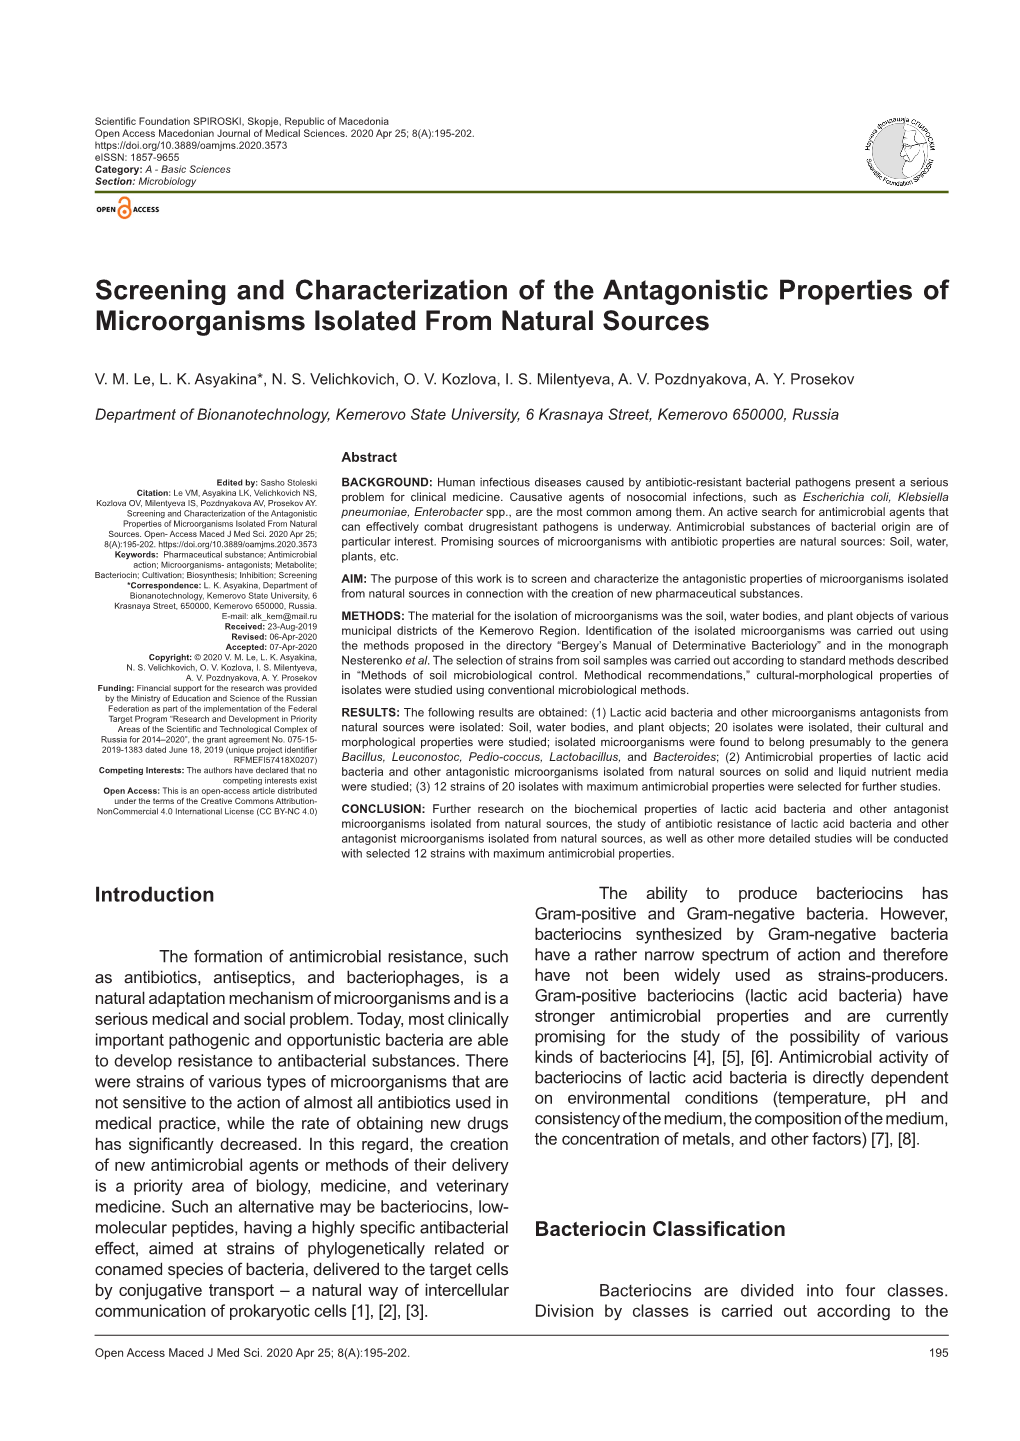 Screening and Characterization of the Antagonistic Properties of Microorganisms Isolated from Natural Sources